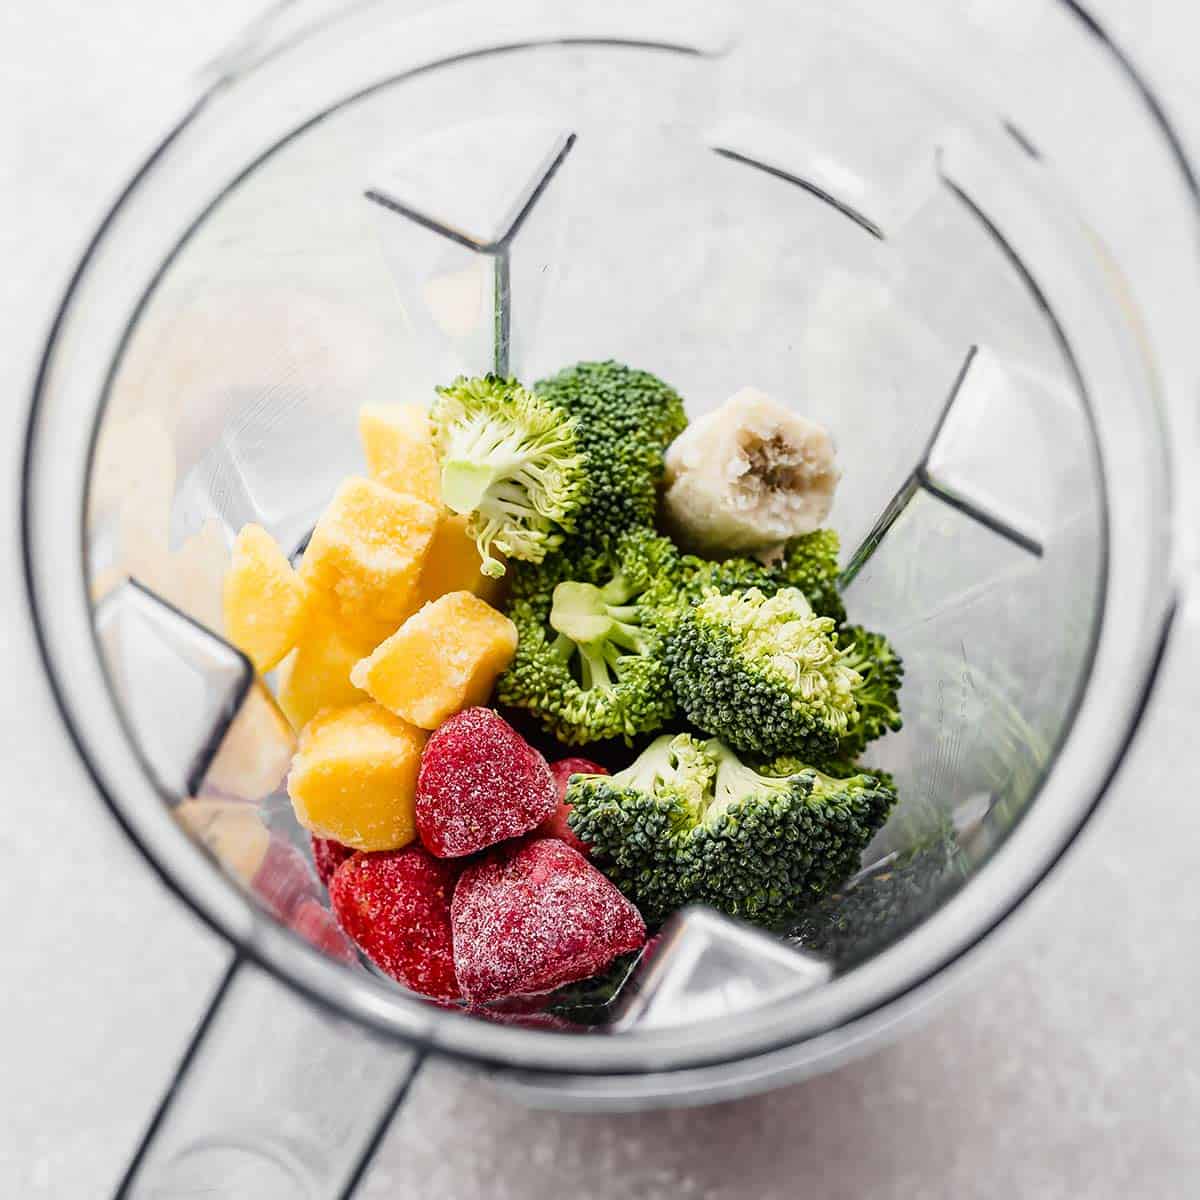 A blender filled with raw broccoli, strawberries, mango chunks, and banana for making a Broccoli Smoothie.